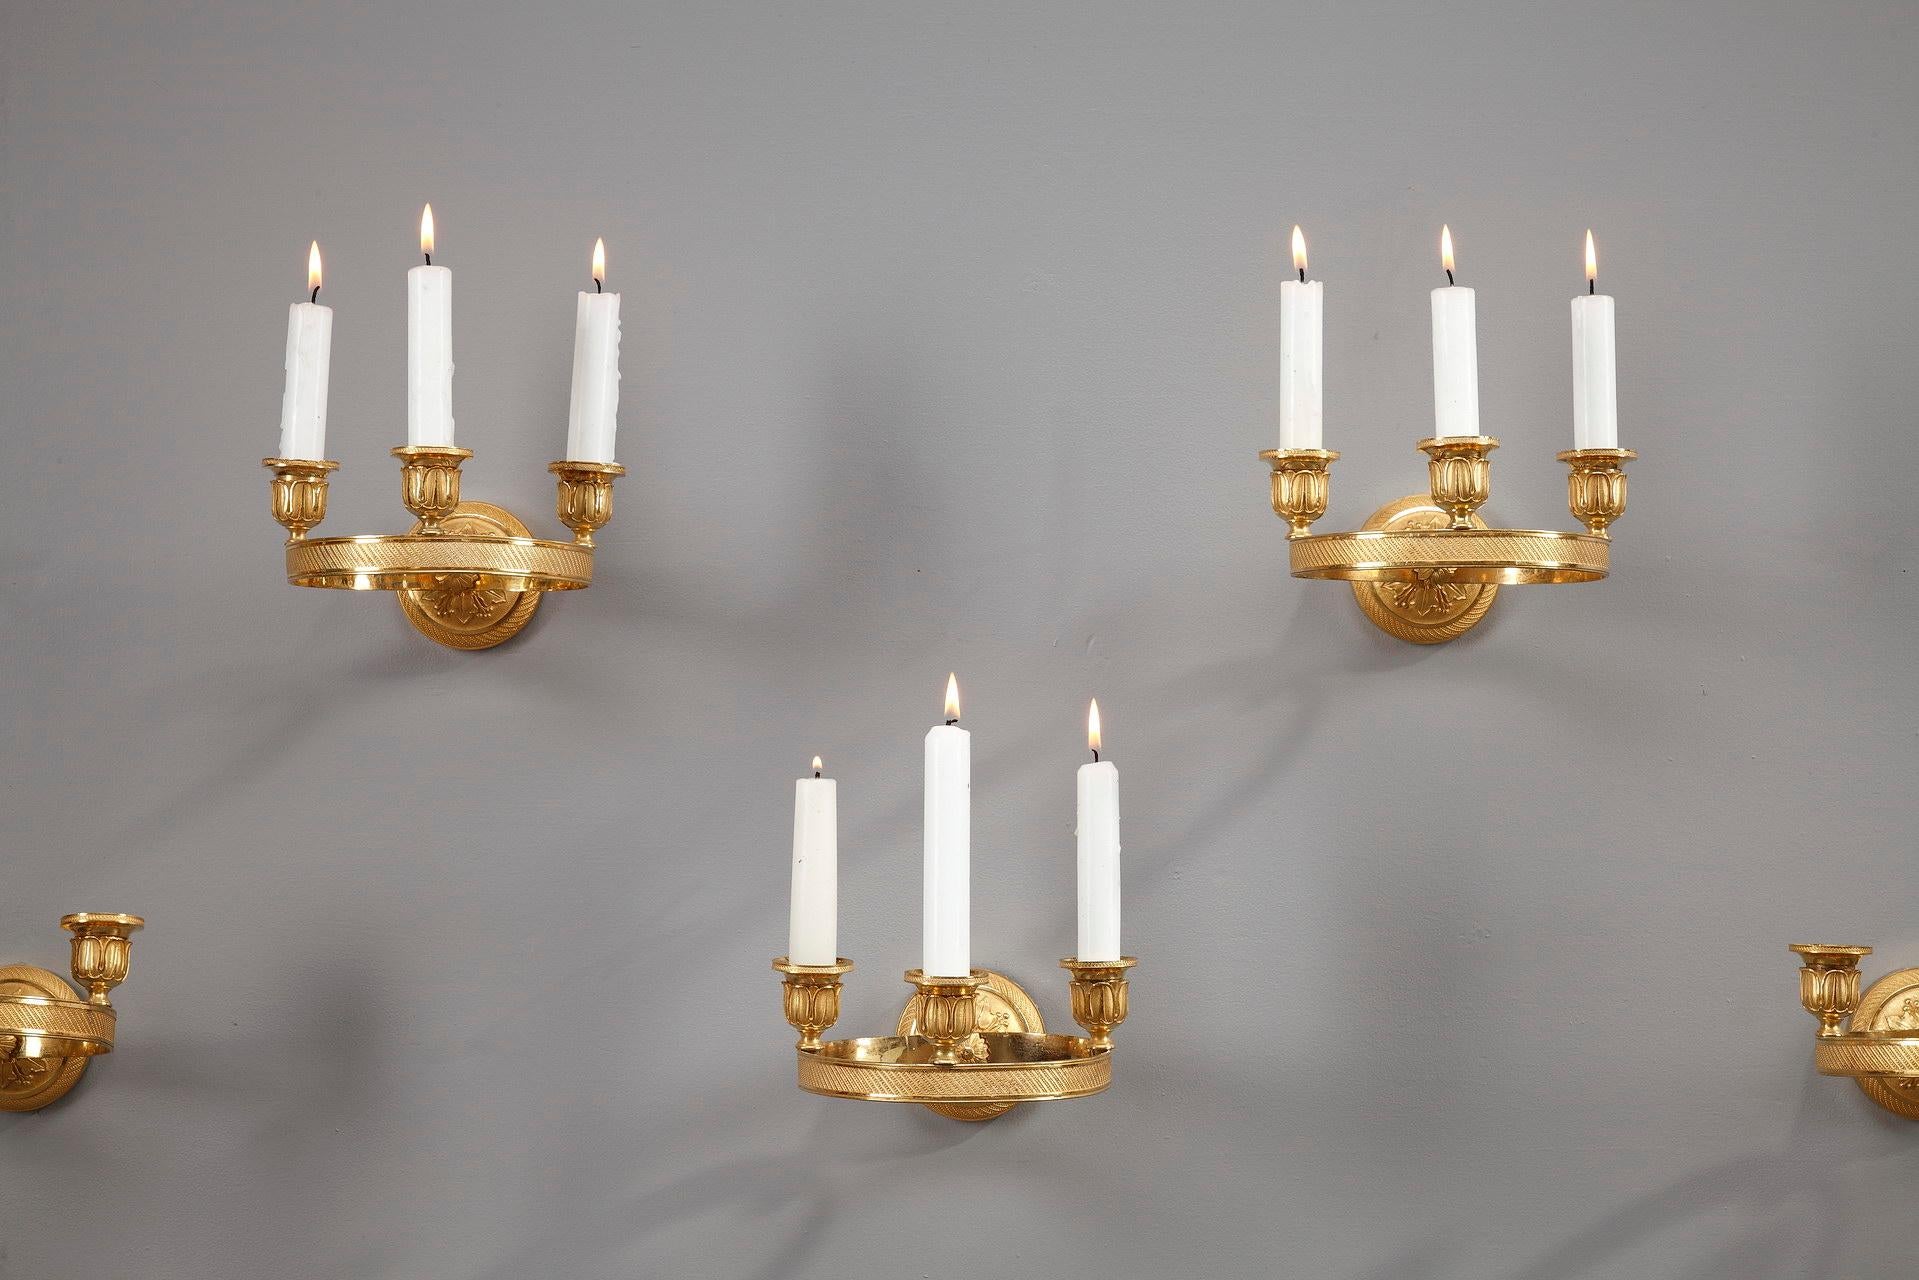 Set of 6 Charles X wall sconces with three lights, circular shape in gilt bronze chiseled with fine motifs. Each sconce, decorated with friezes of fine pearls, is fixed to the wall by a rosette decorated with leaves and fruits. Very beautiful